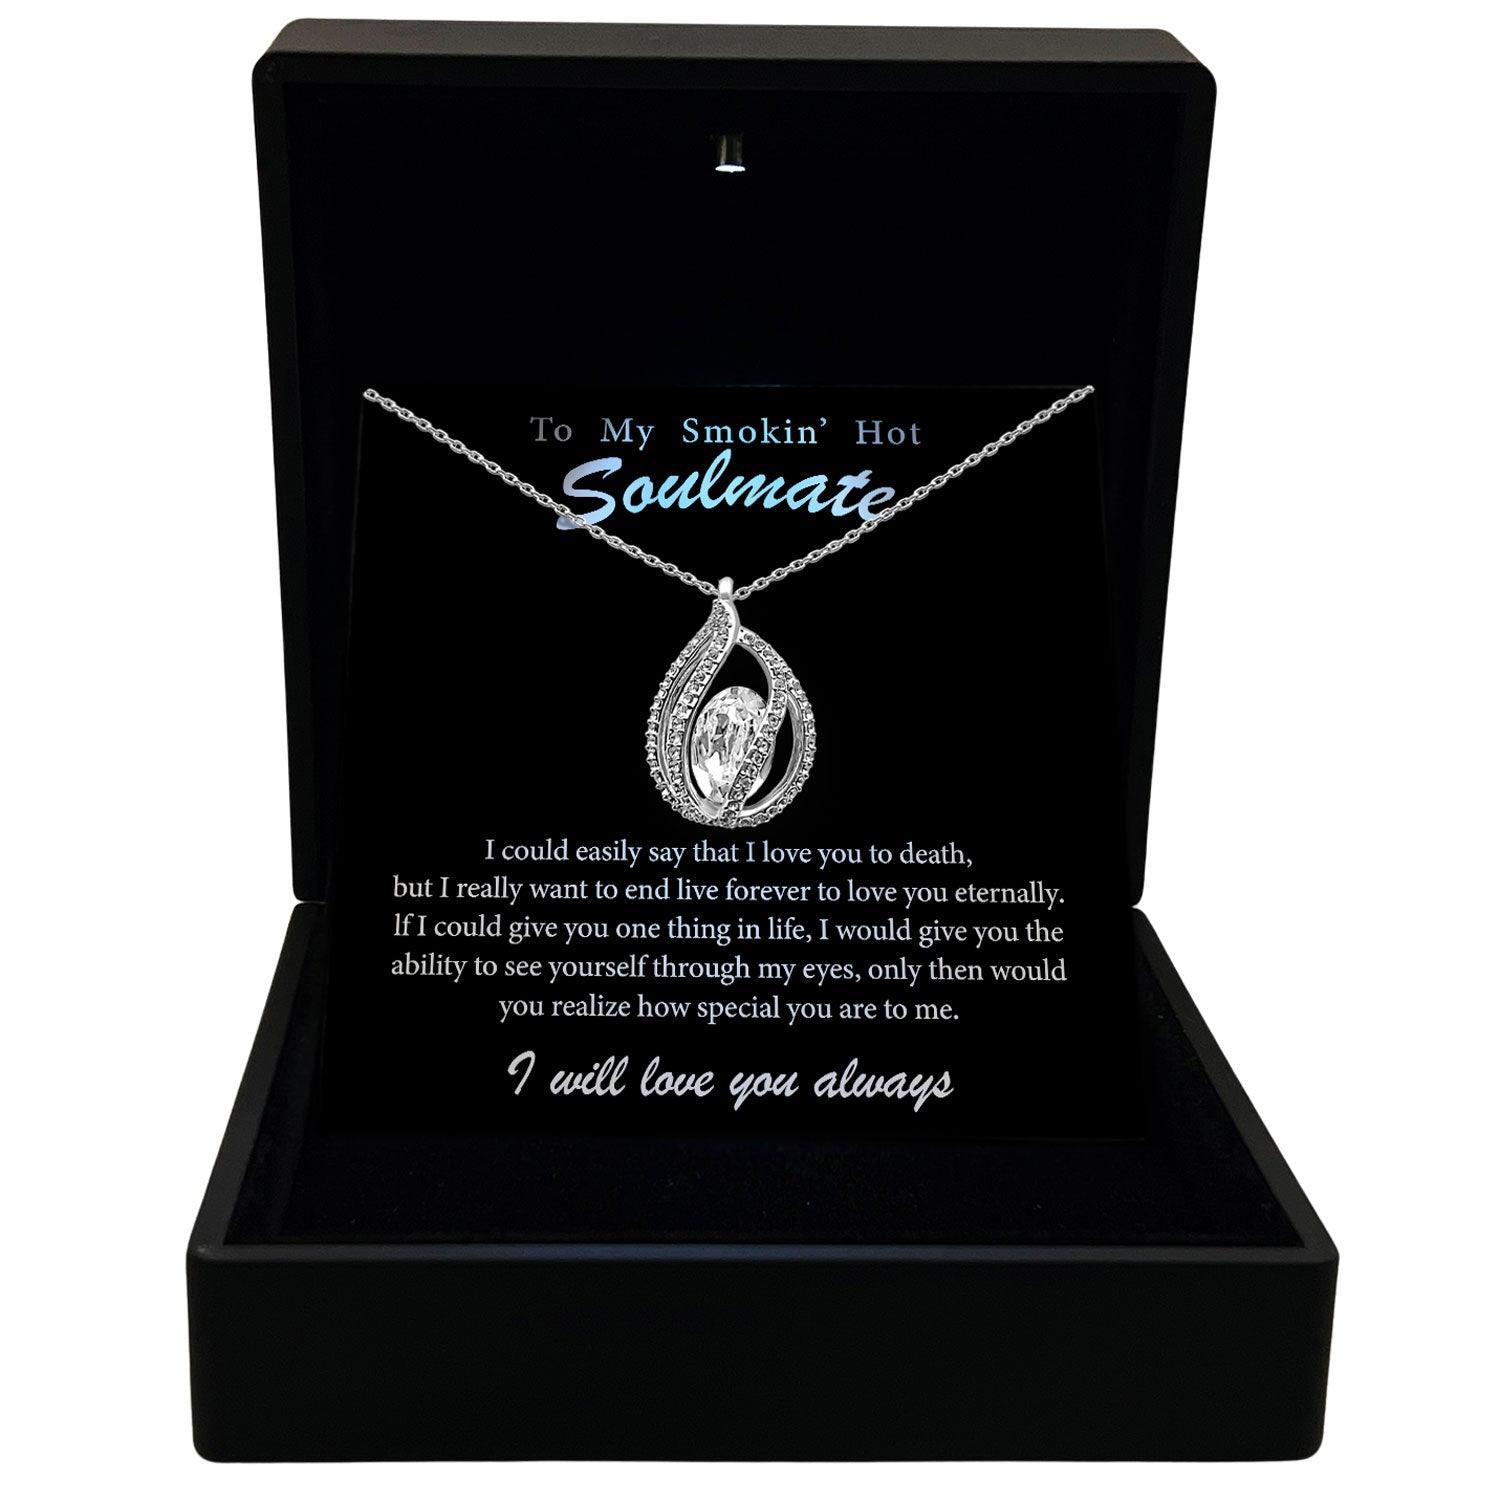 To My Smokin' Hot Soulmate - I Really Want To End Life Forever To Love You Eternally - Orbital Birdcage Necklace - TRYNDI